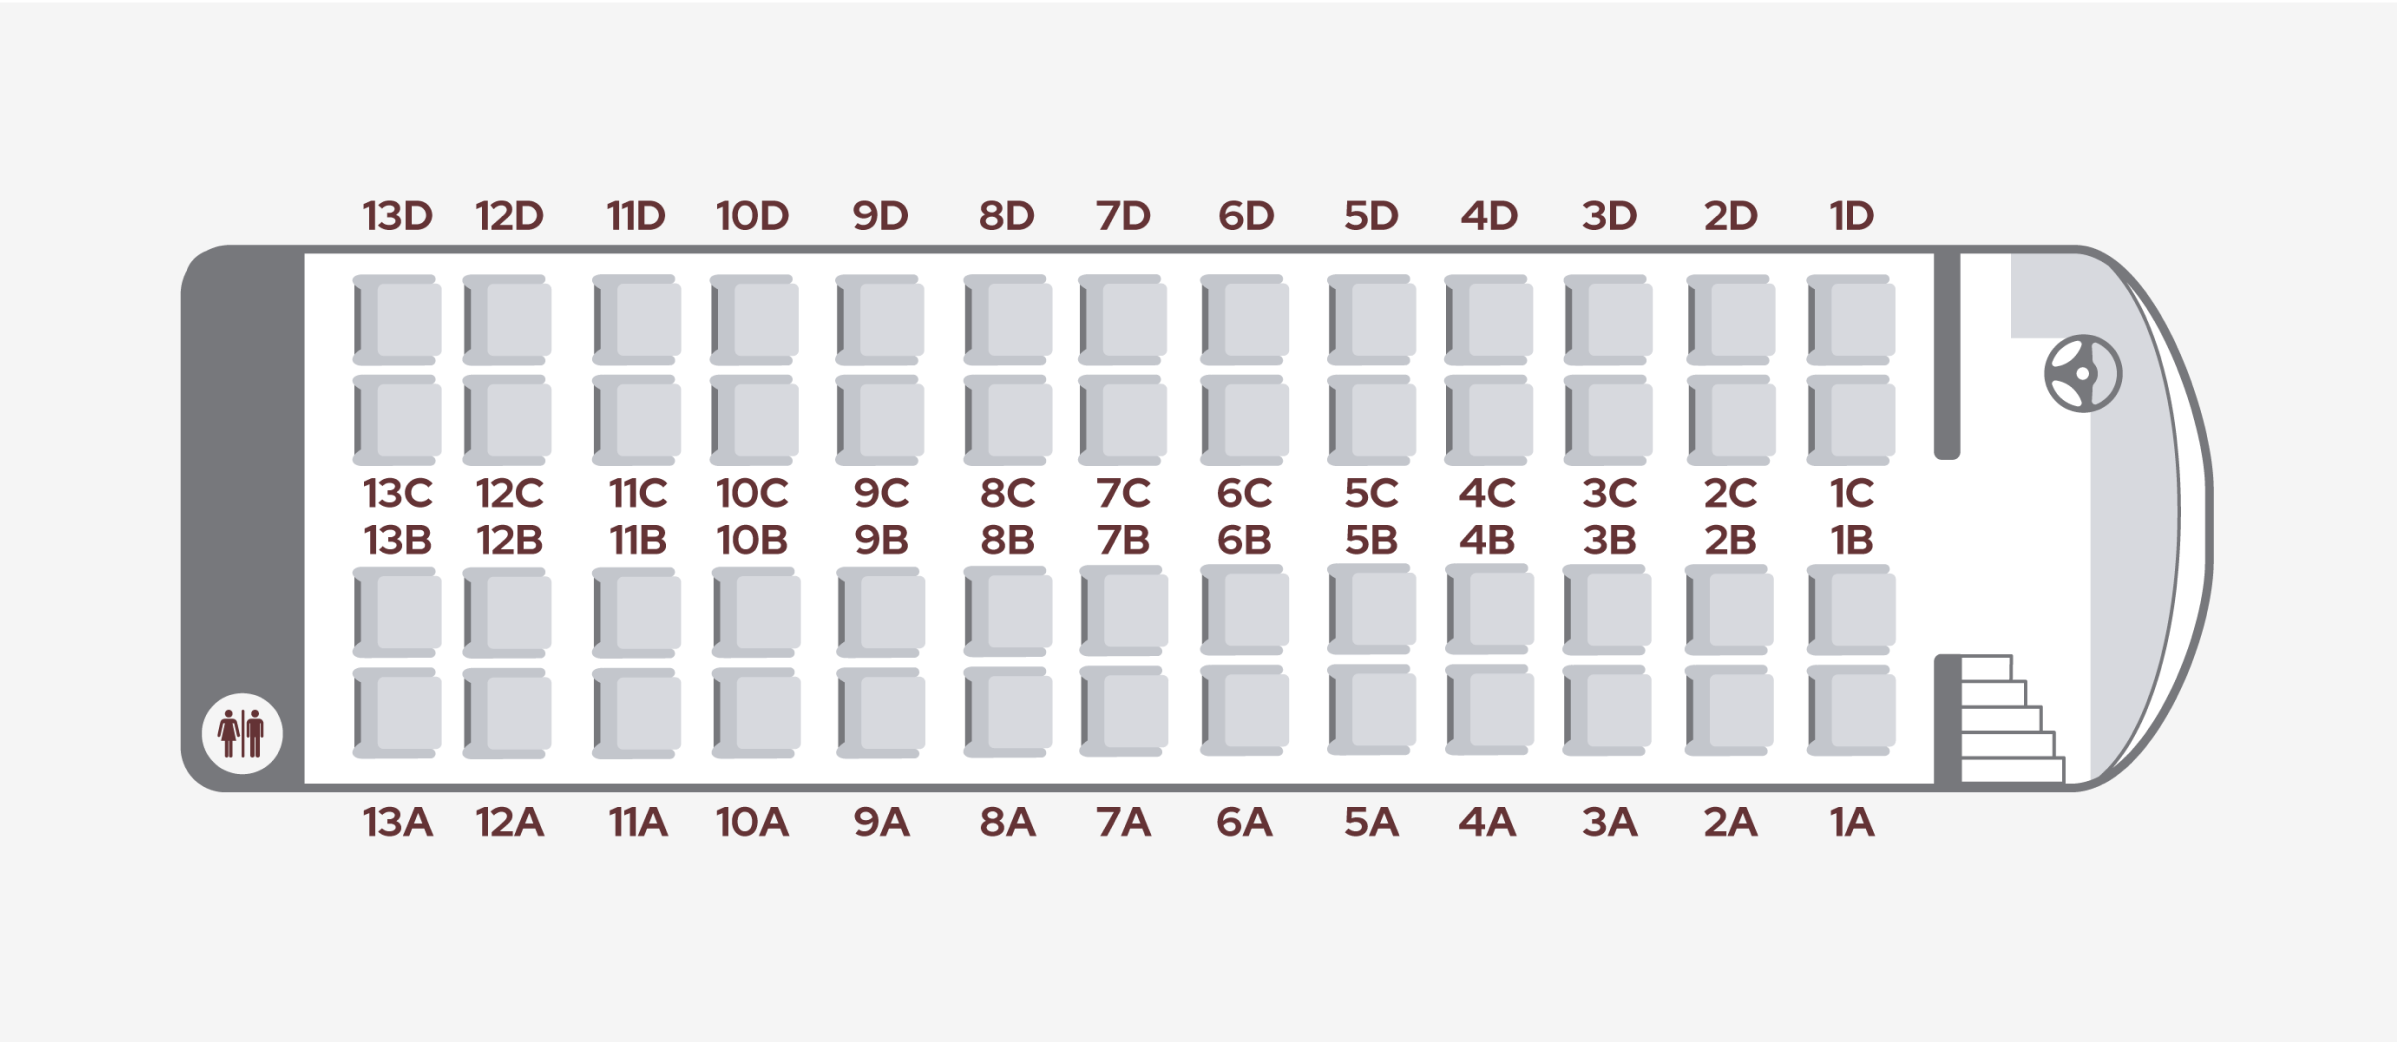 Onboard Experience Seat Selection